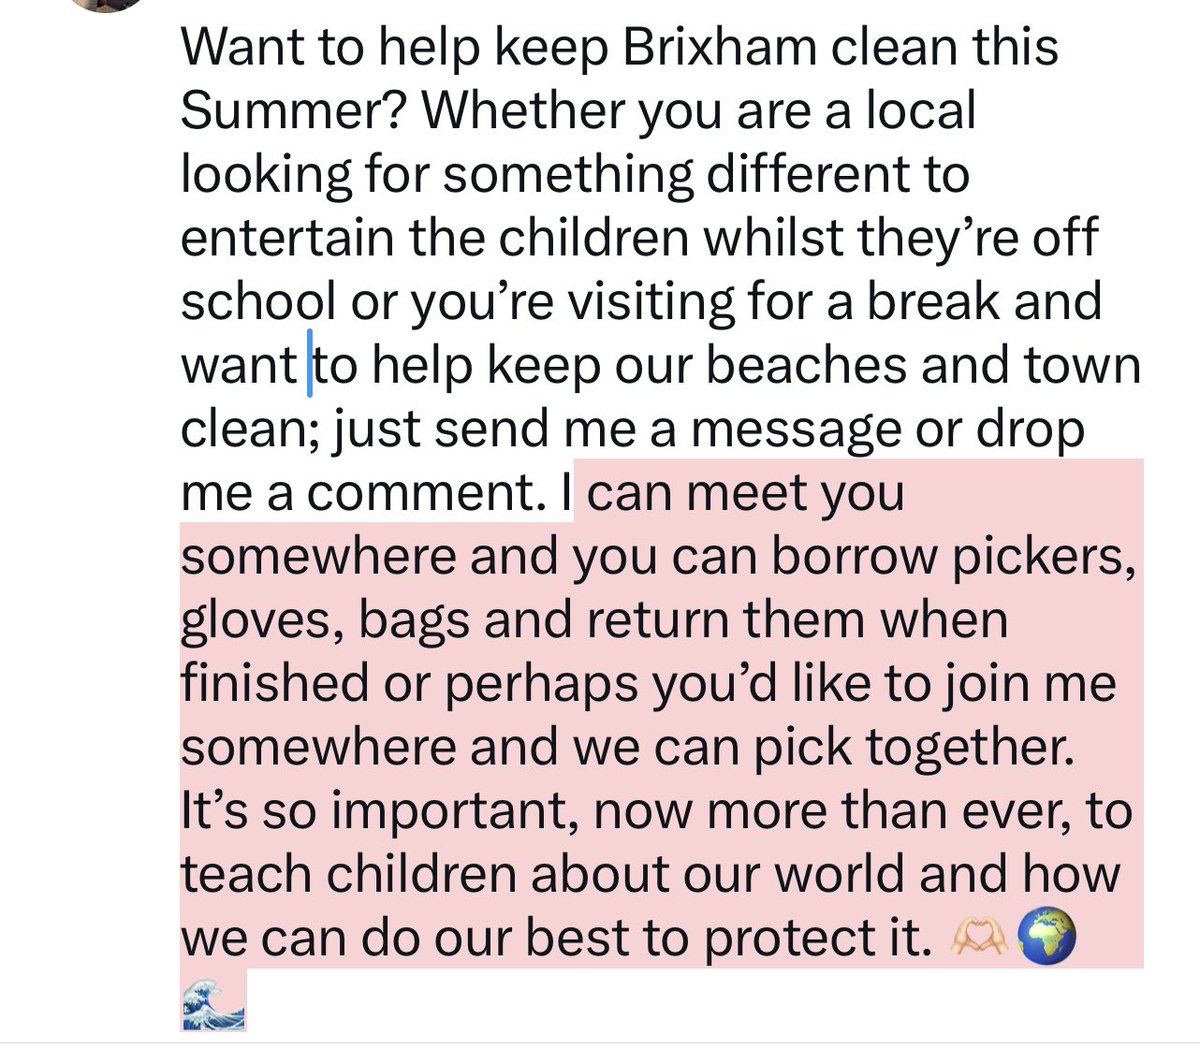 Want to help keep Brixham clean this Summer? Read on to find out how! #LoveBrixham #Brixham #Torbaydos #Litterpicking #BeachClean